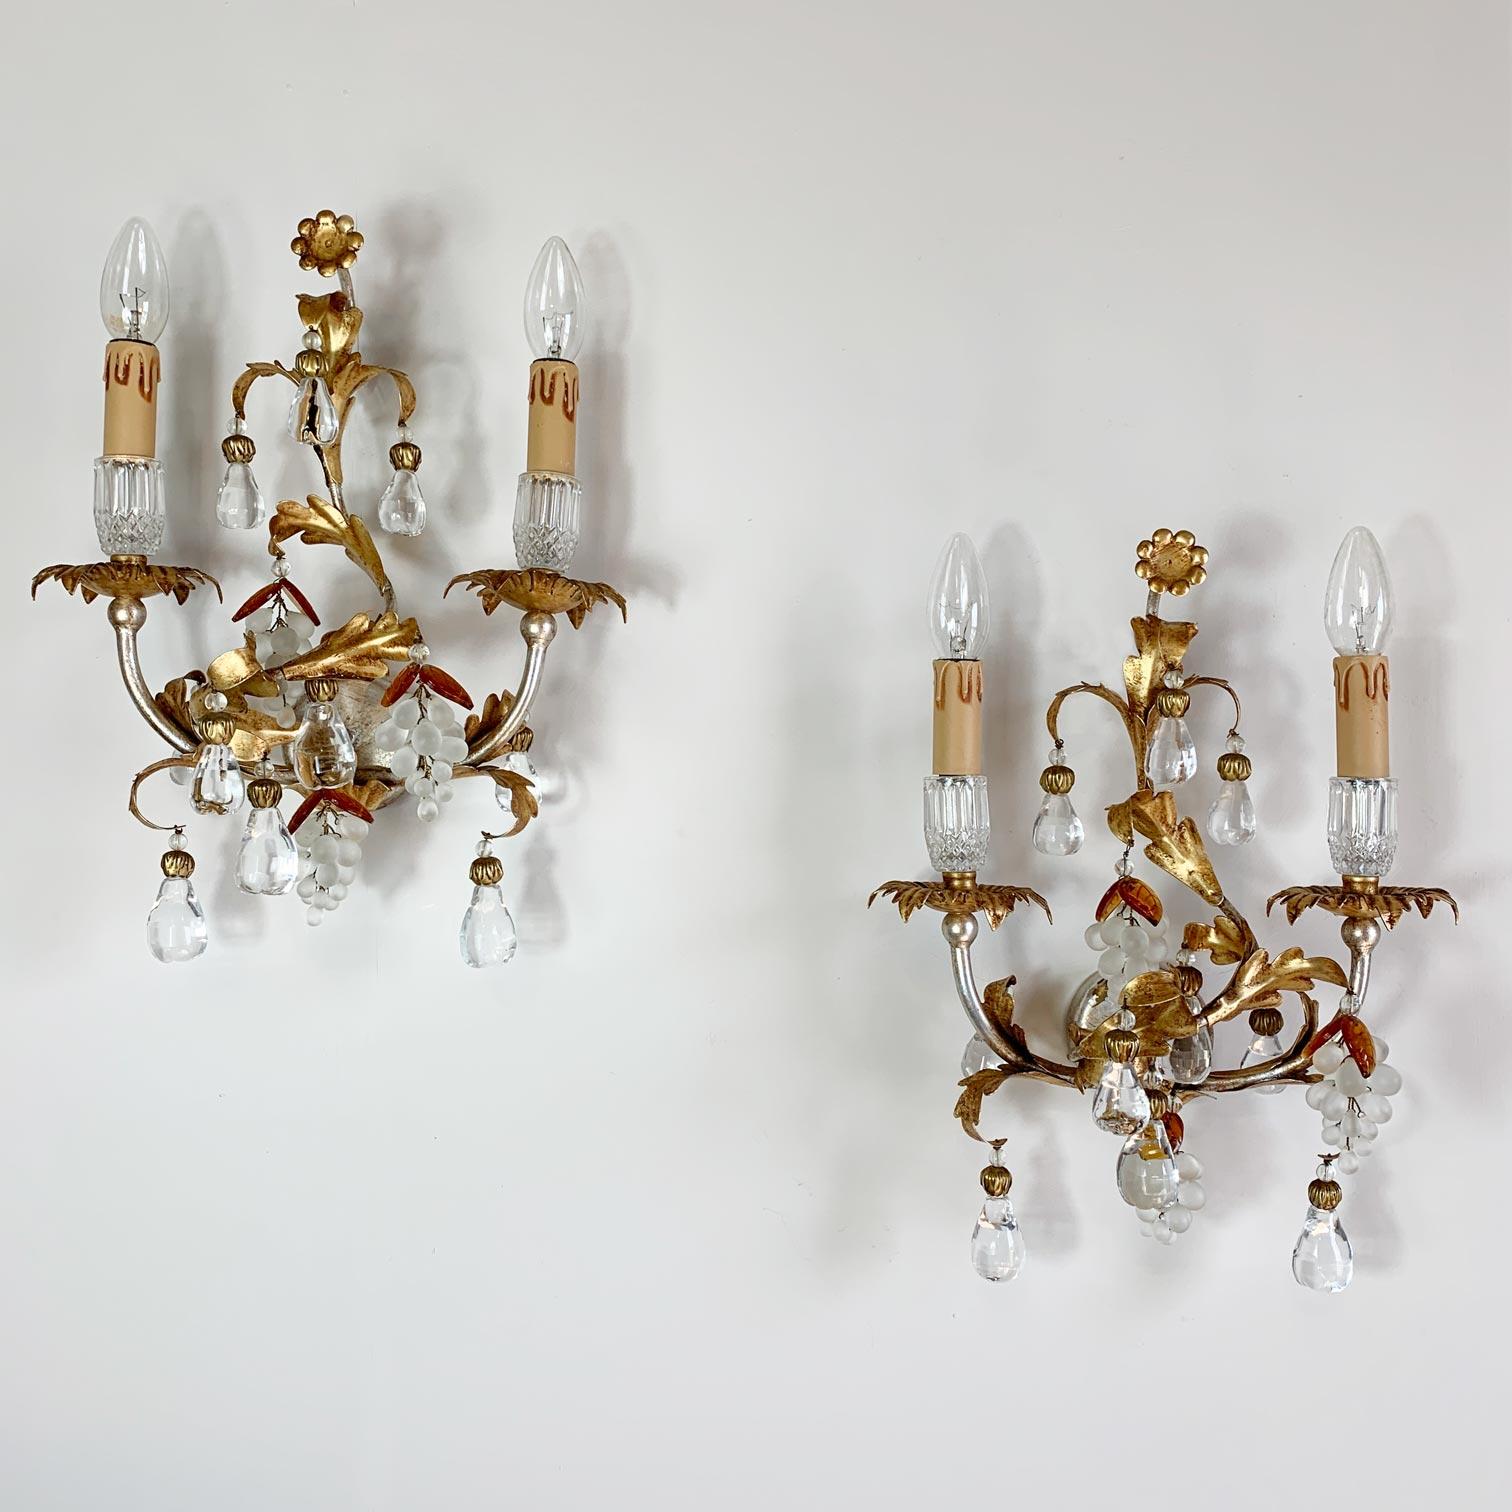 An exceptional pair of Banci Firenze, Italian wall lights, hand crafted gilt iron work, resplendent with crystal Grape and Pear decorative elements. Each light has two lamp holders, each sat upon a crystal cup, they take E14 (small screw in) light